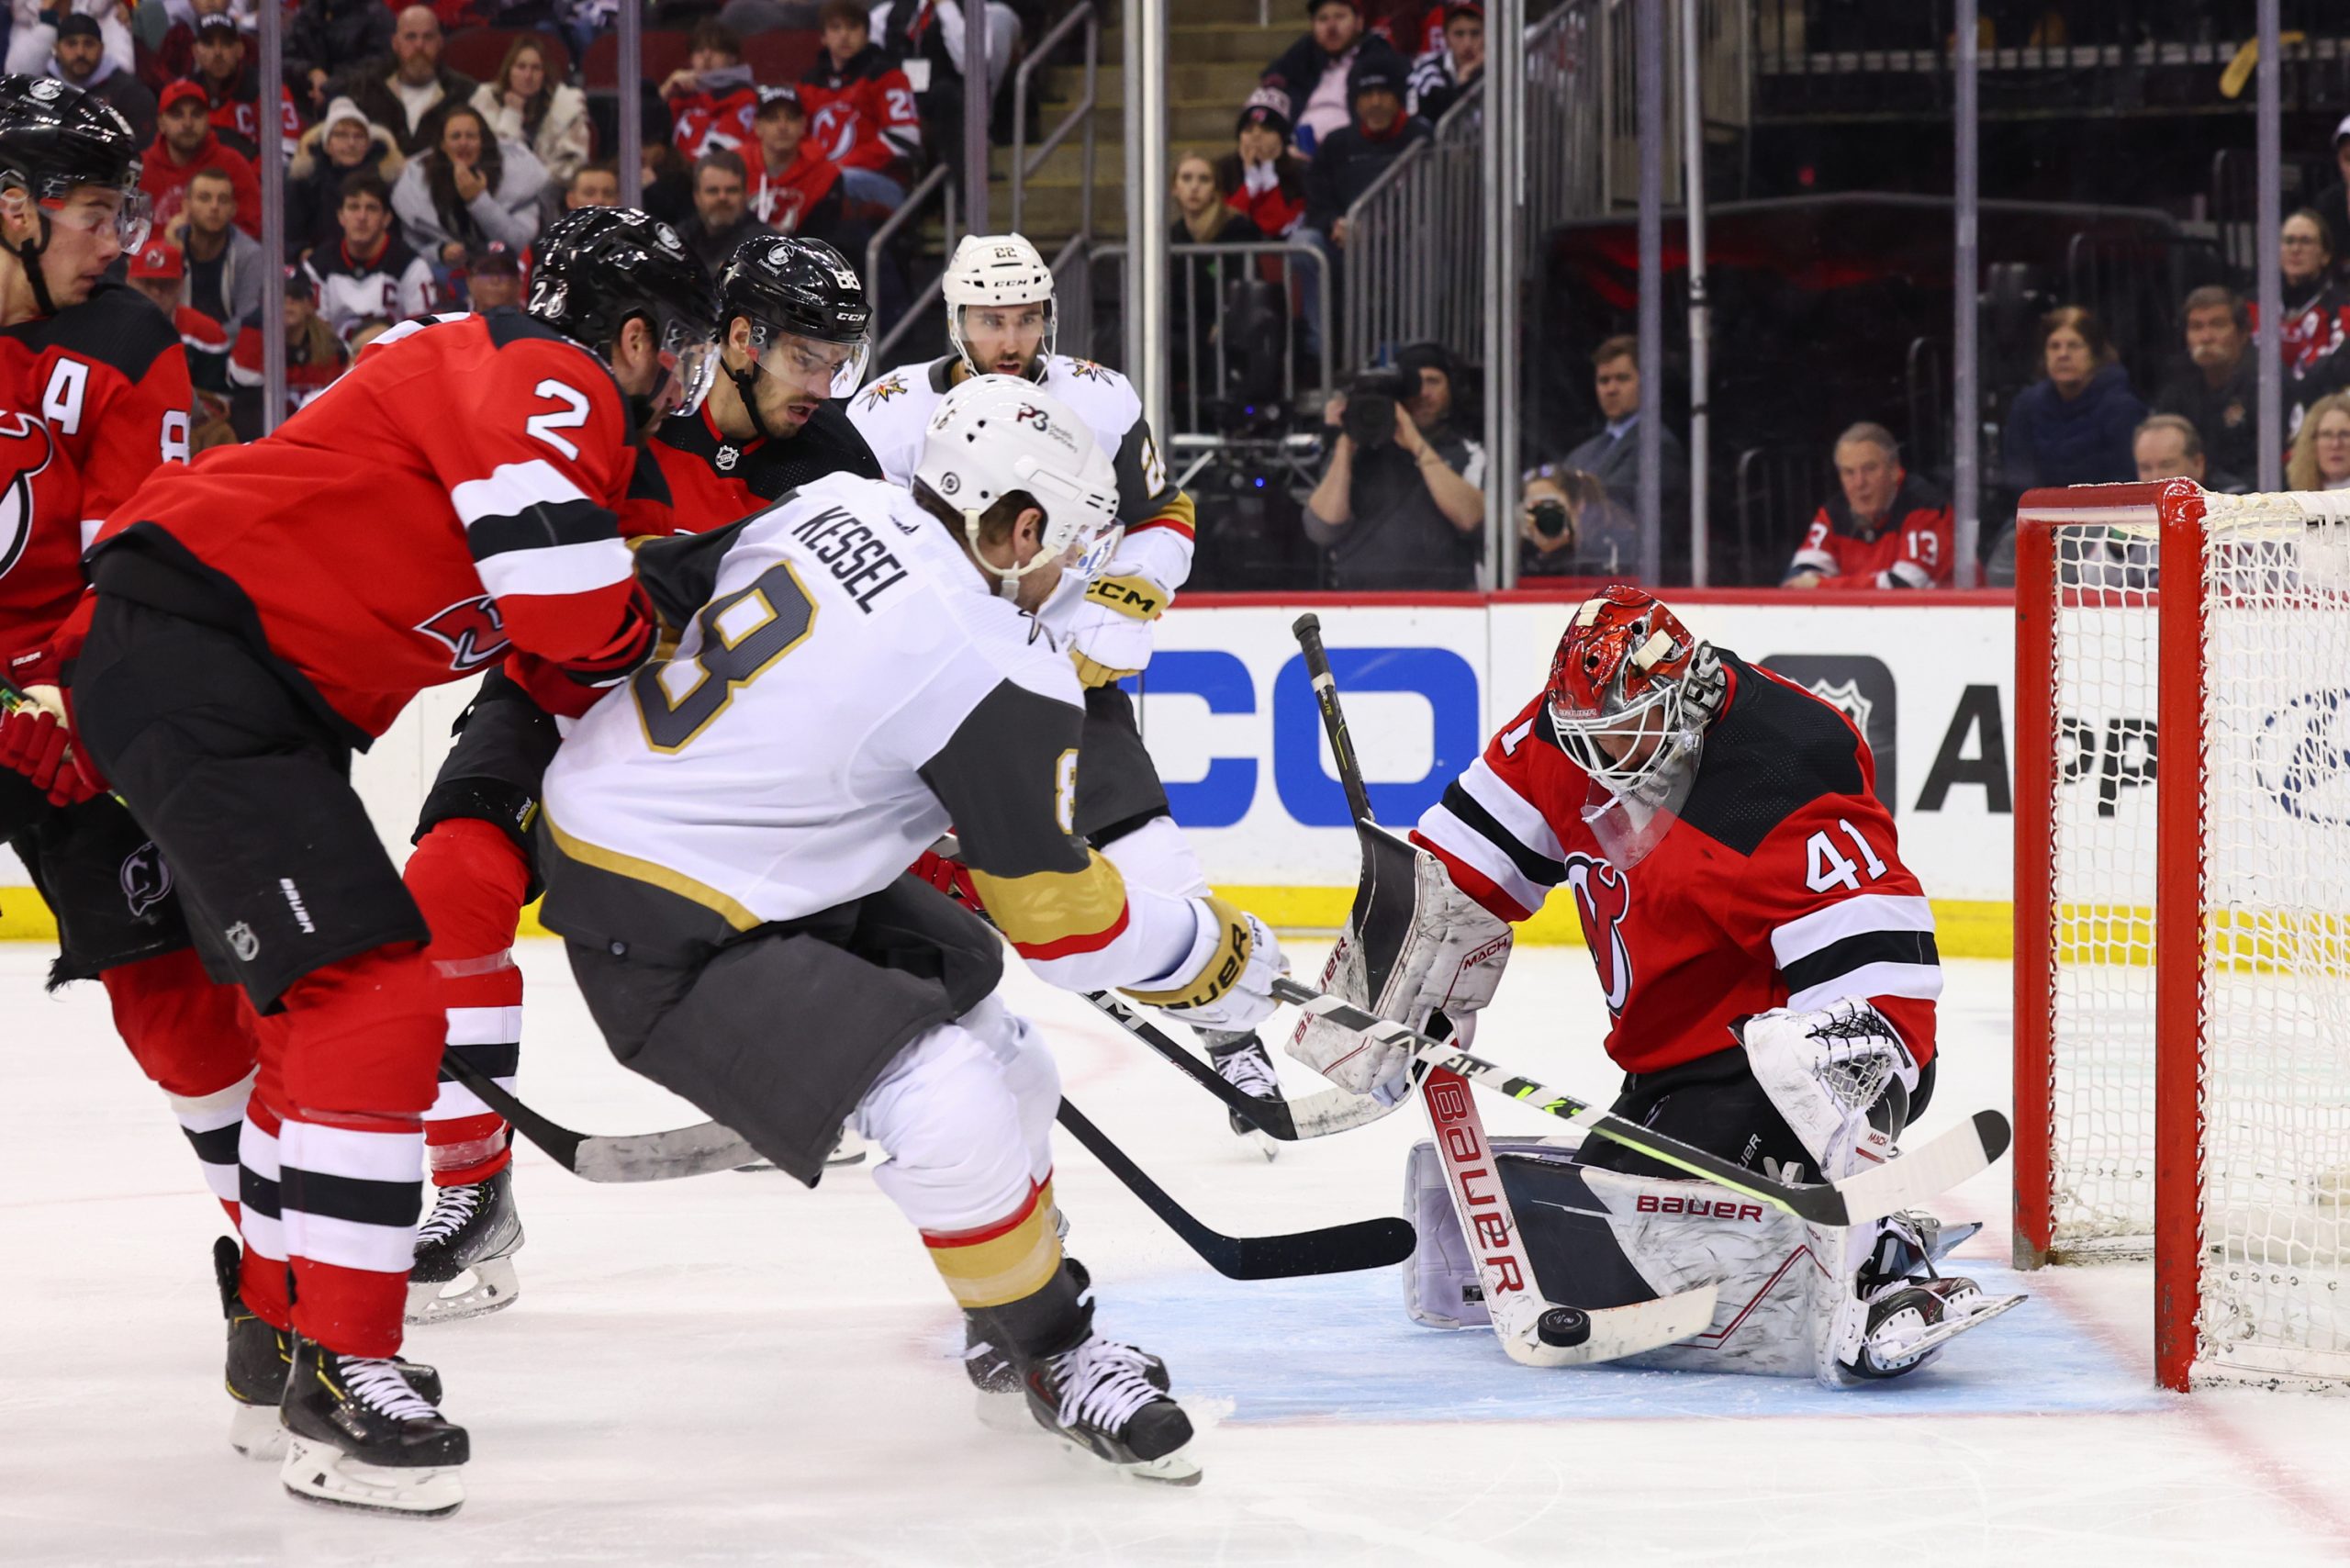 NHL Predictions: March 3 with Devils vs Golden Knights